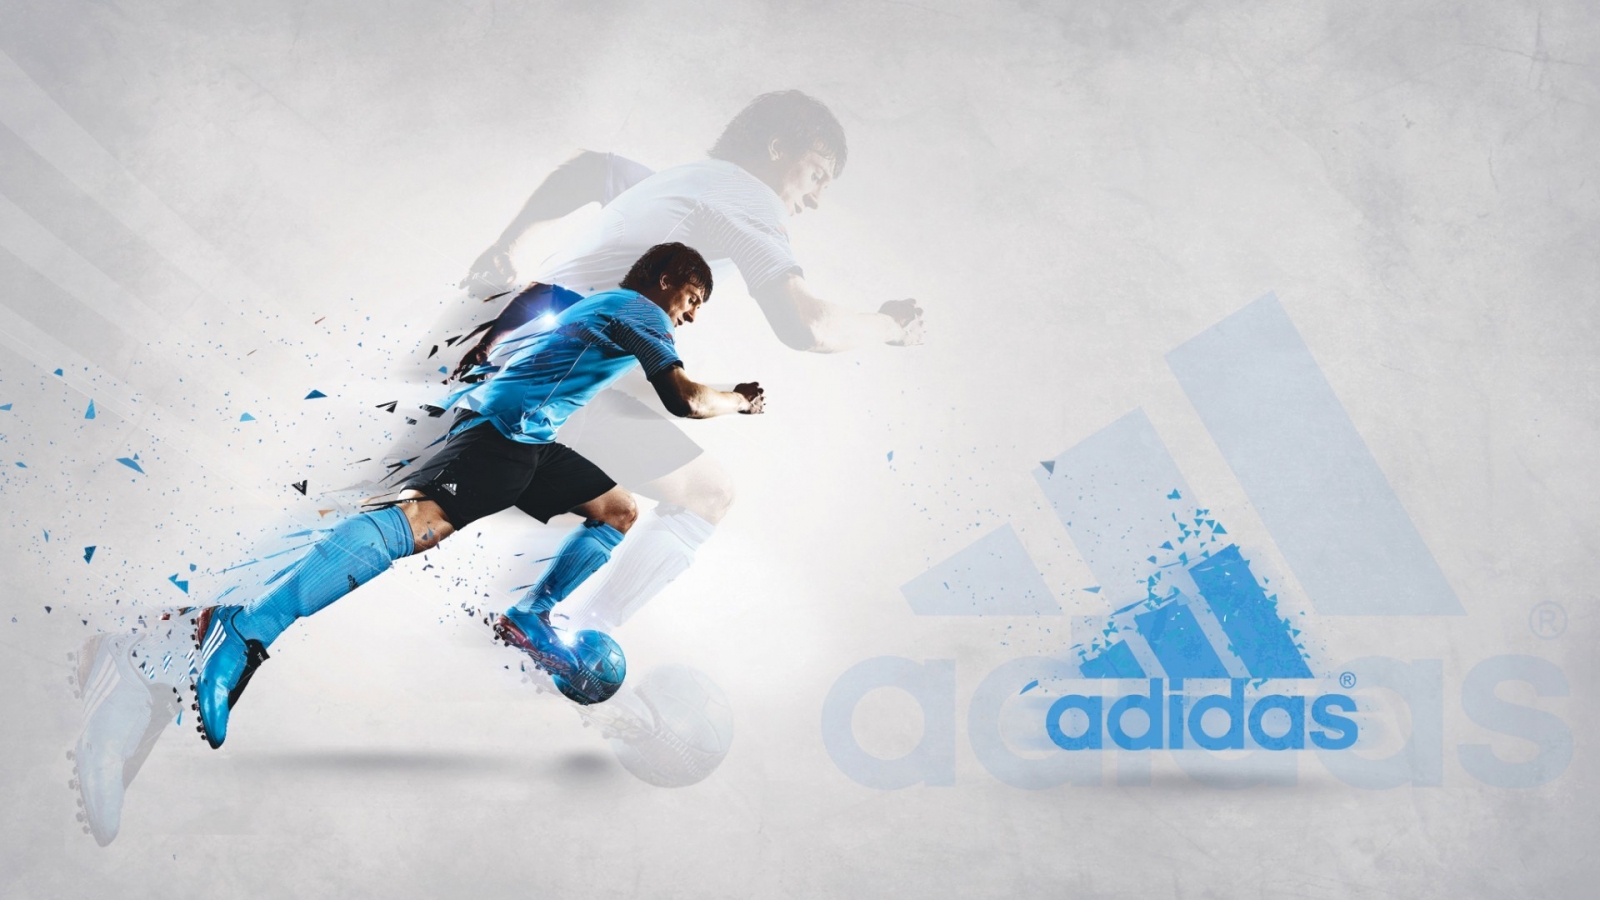 Adidas Poster for 1600 x 900 HDTV resolution